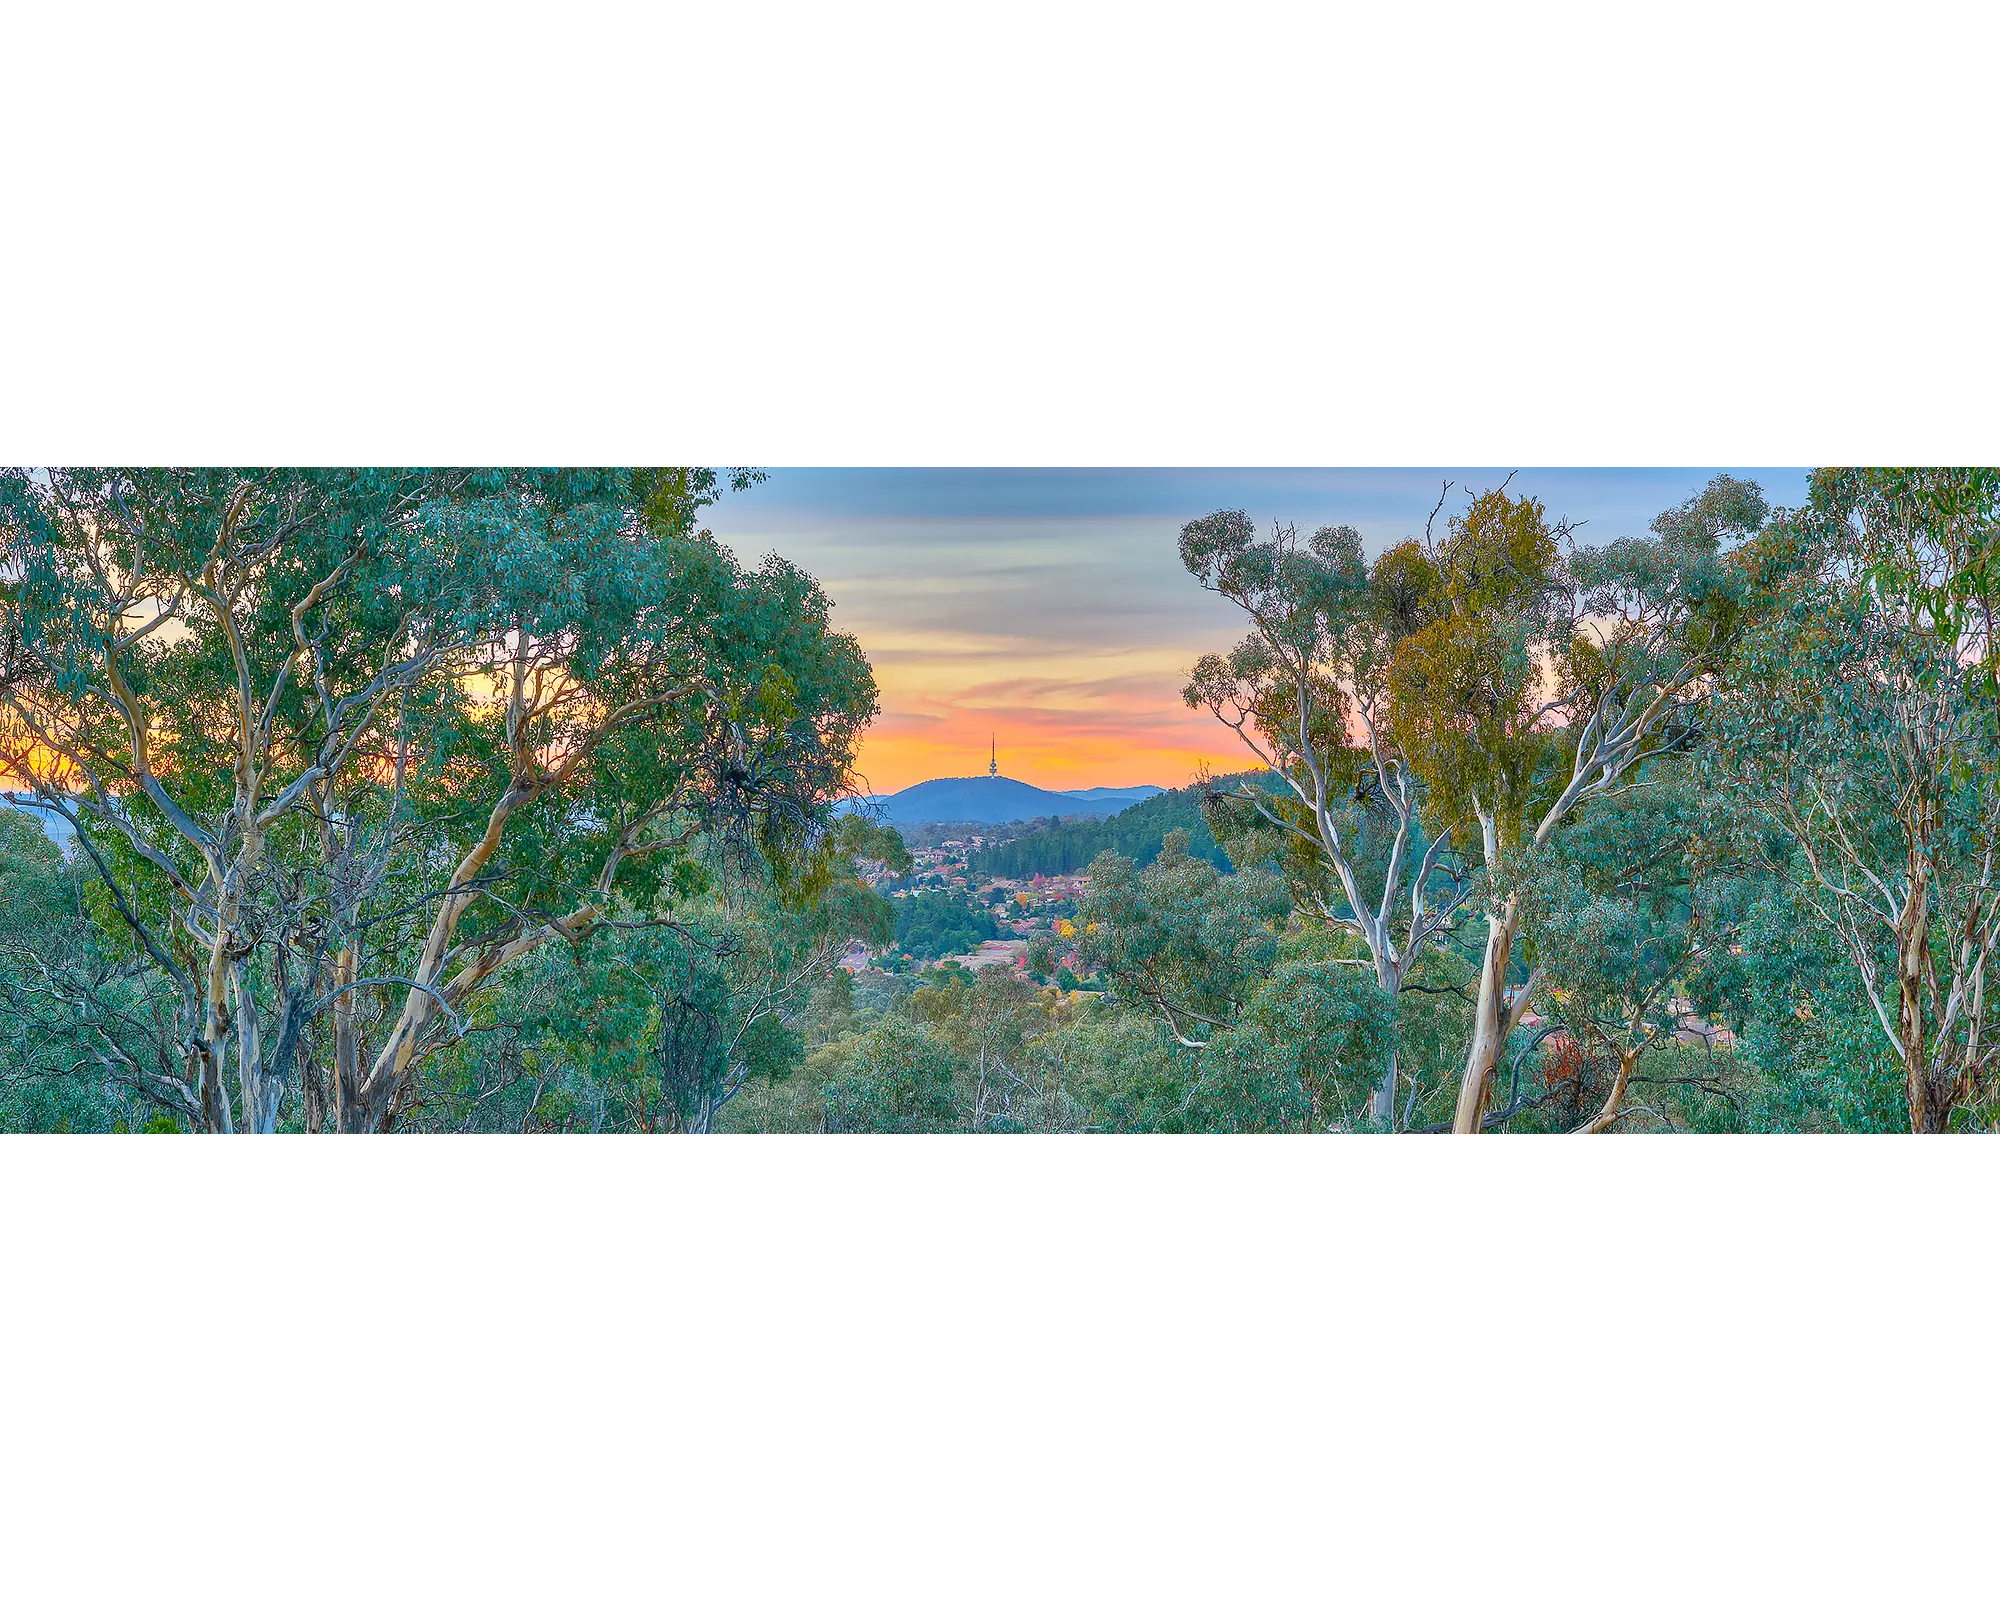 Black Mountain, Telstra Tower, gum trees and Canberra suburbs viewed from Farrer Ridge. 